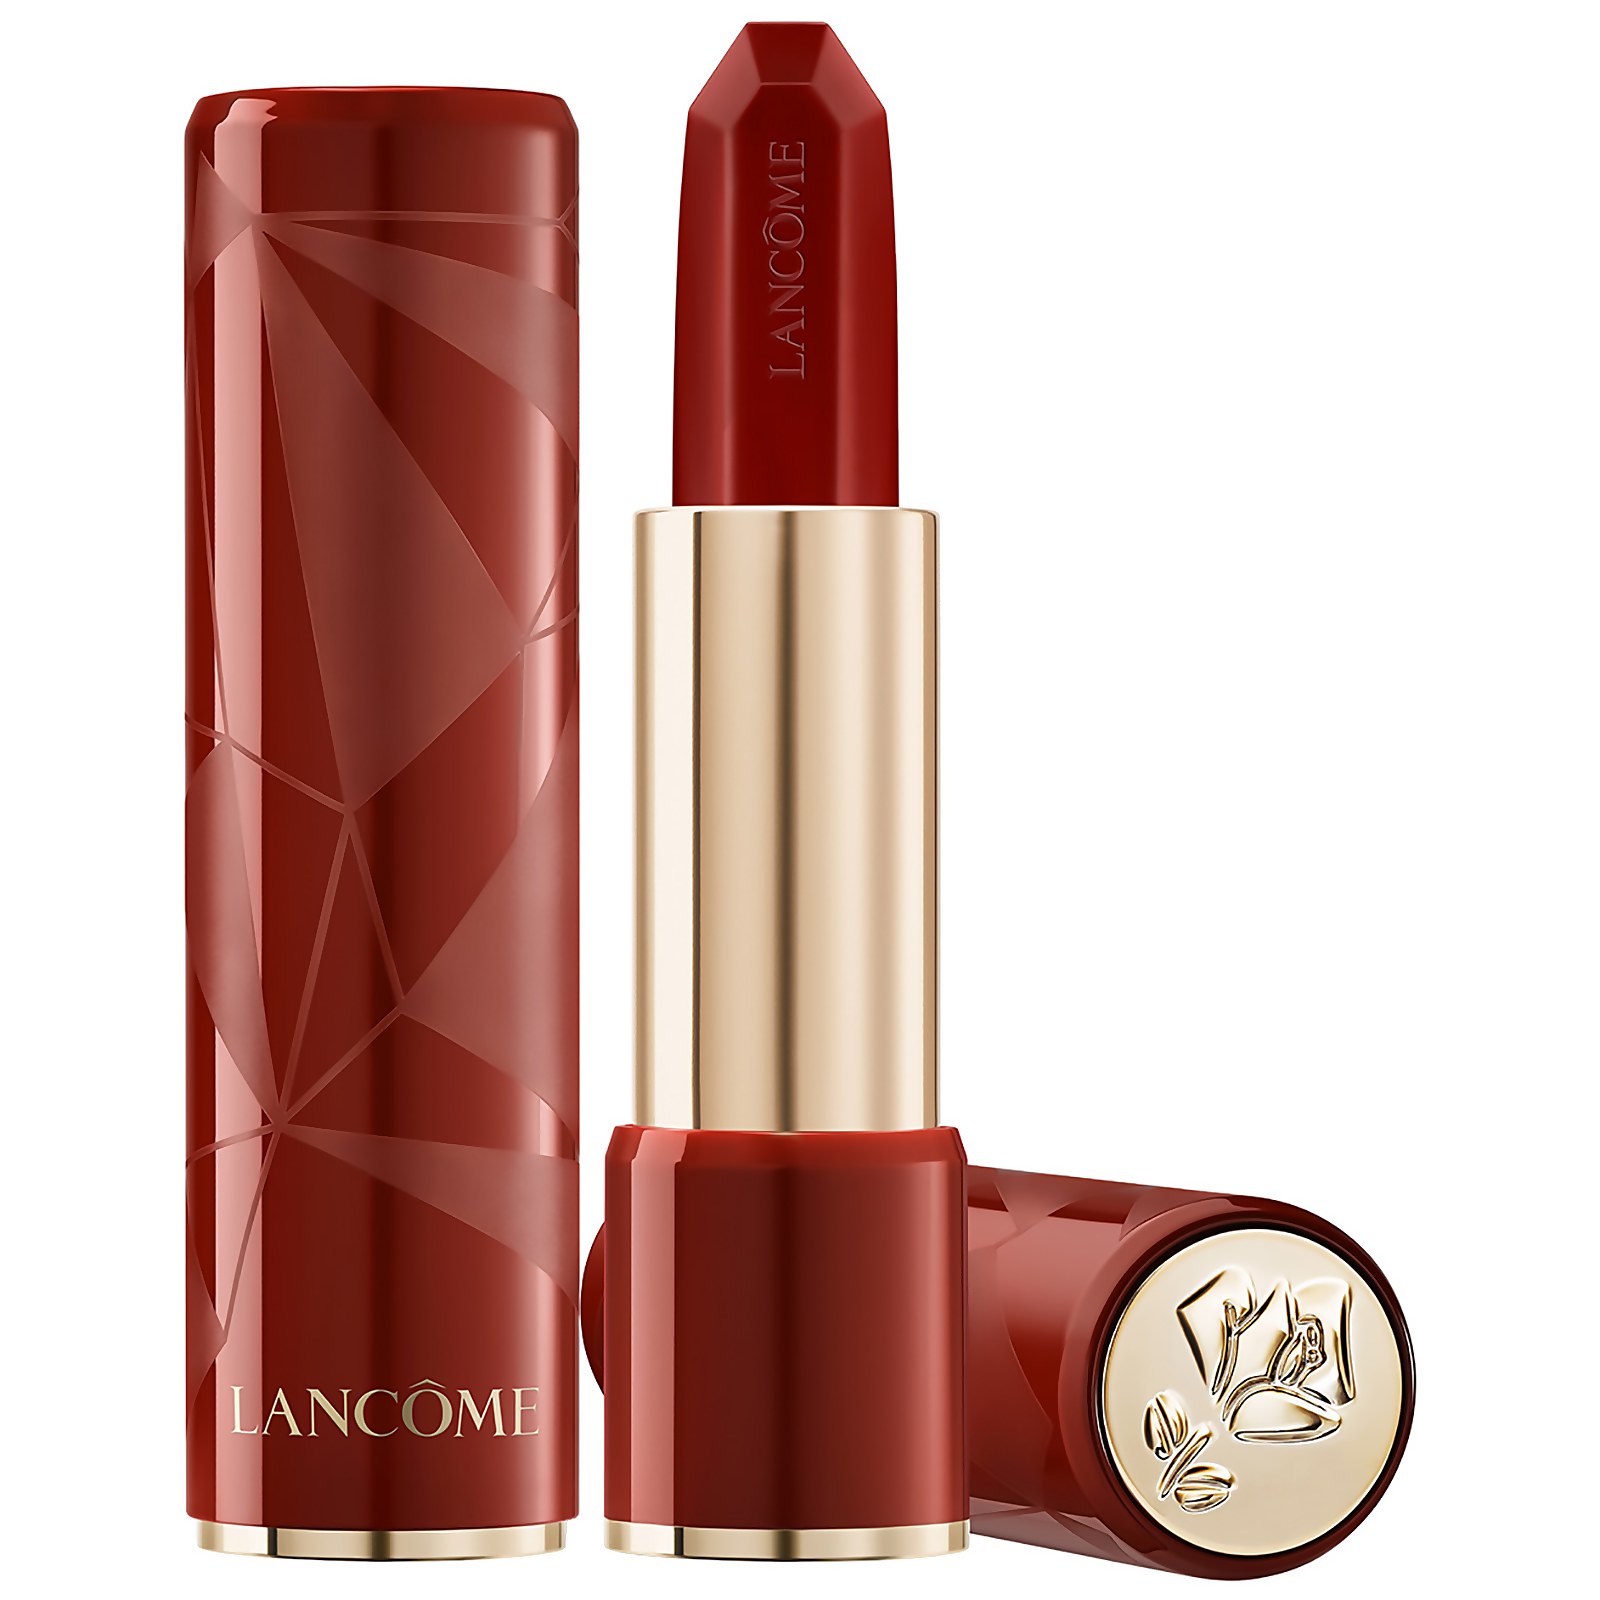 Image of Lancome Absolu Rouge Ruby Cream 3g (Various Shades) - 314 Ruby Star